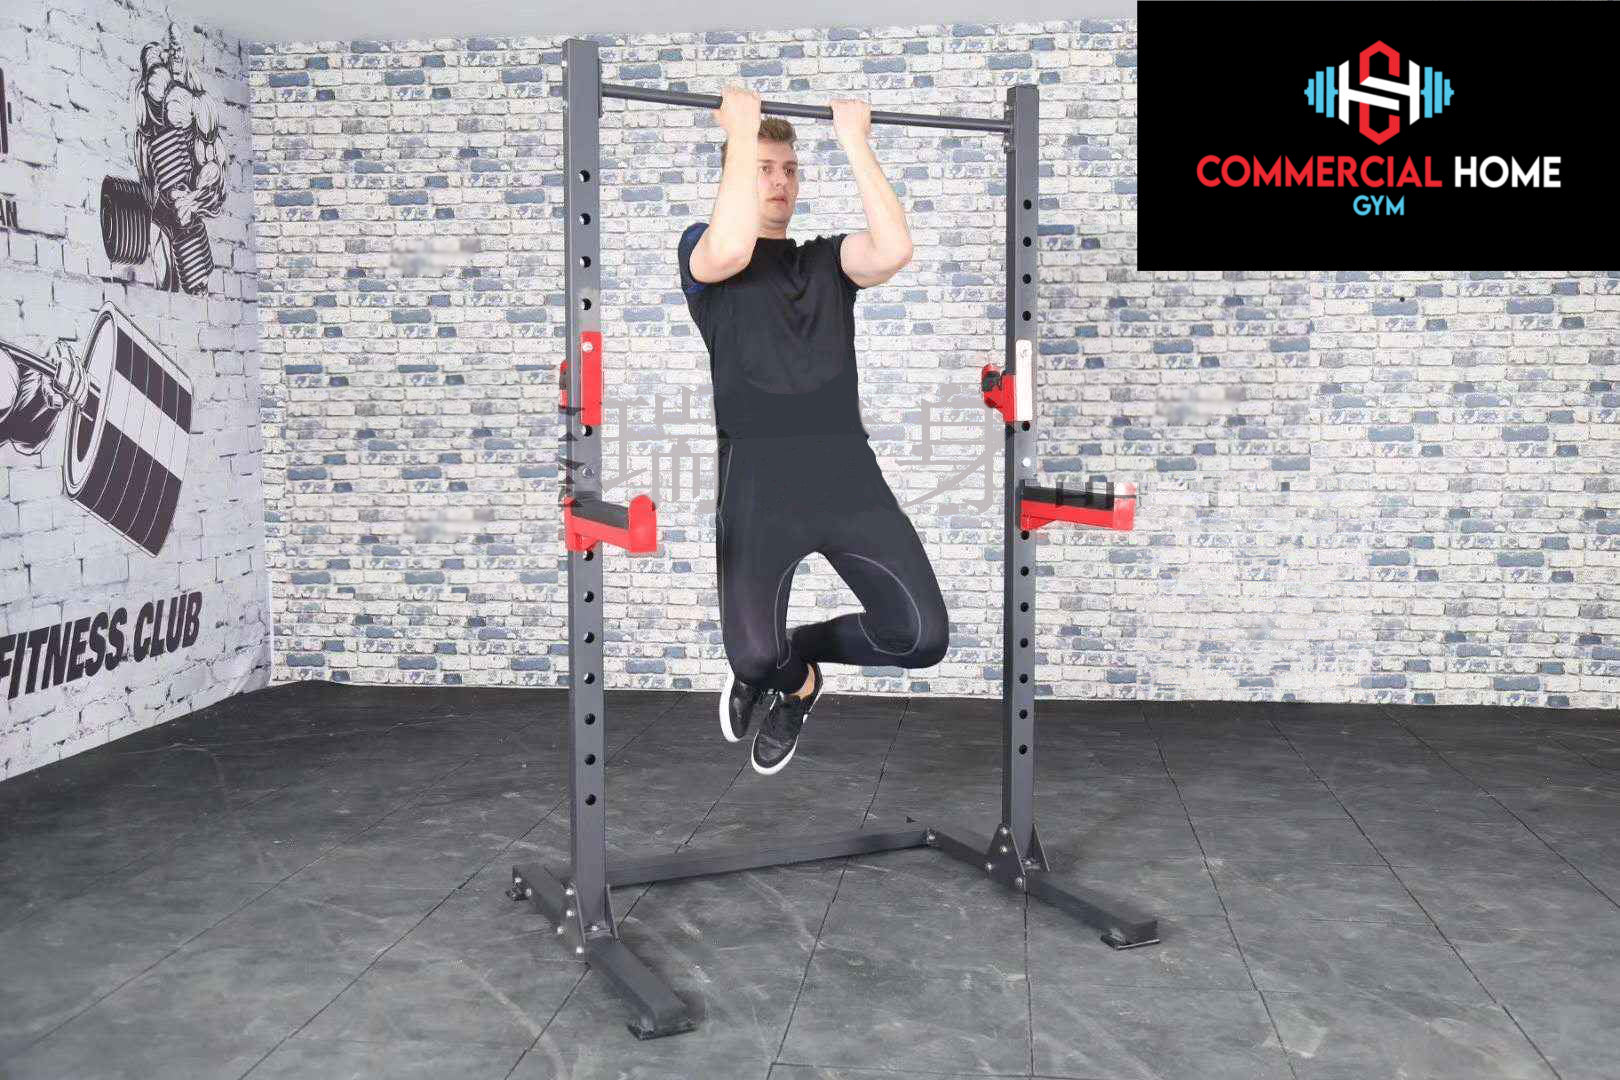 Squat rack being used as pull up bar